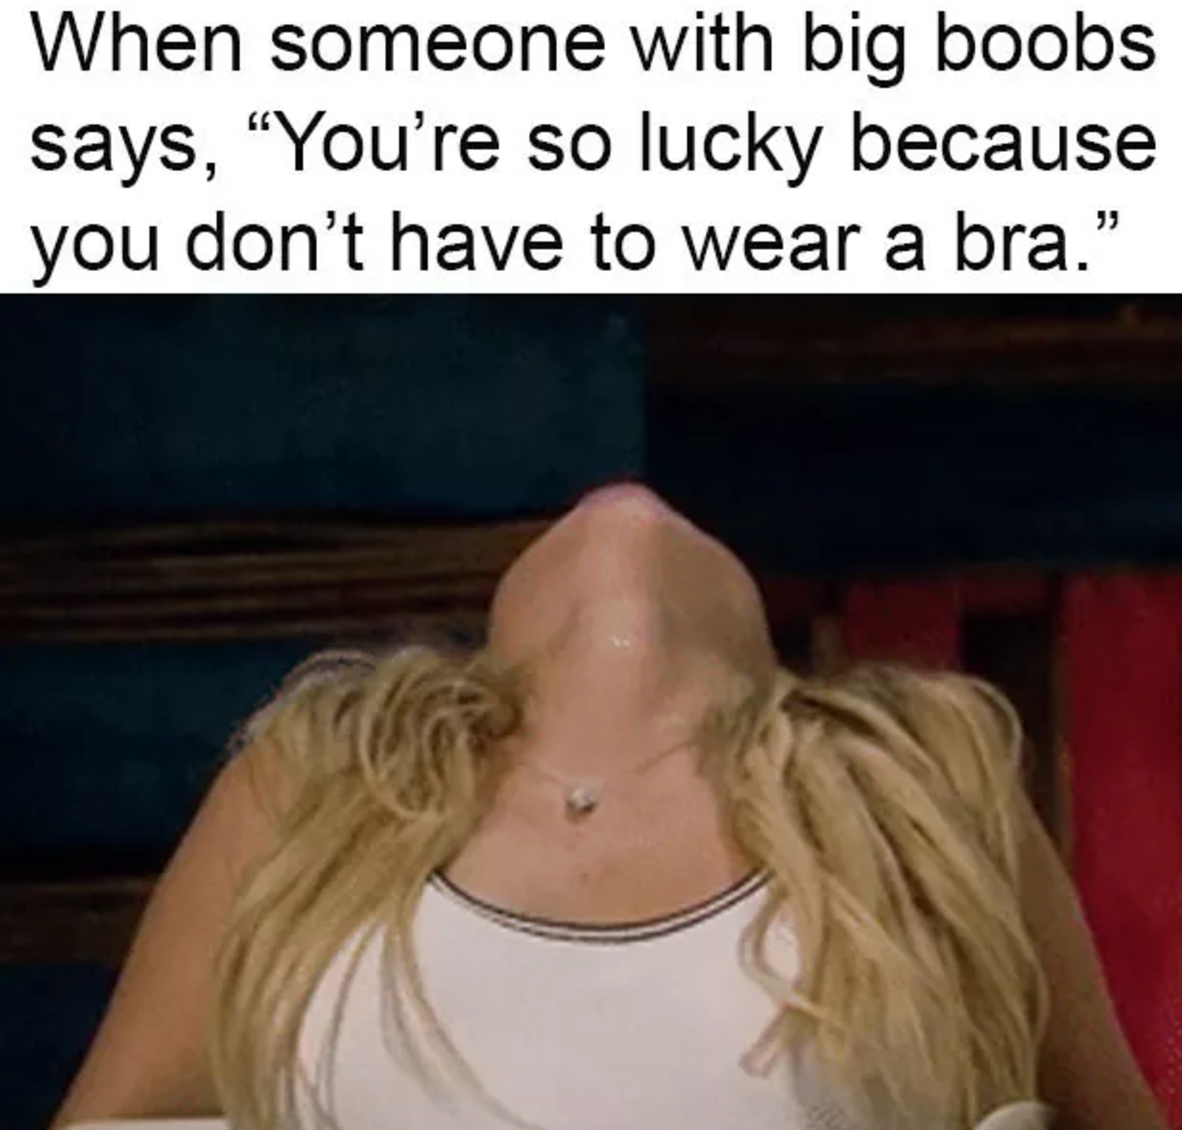 itty bitty titty committee, funny boobs memes, funny memes boobs, small boobs memes, small boobs jokes, boobs jokes, funniest jokes about boobs